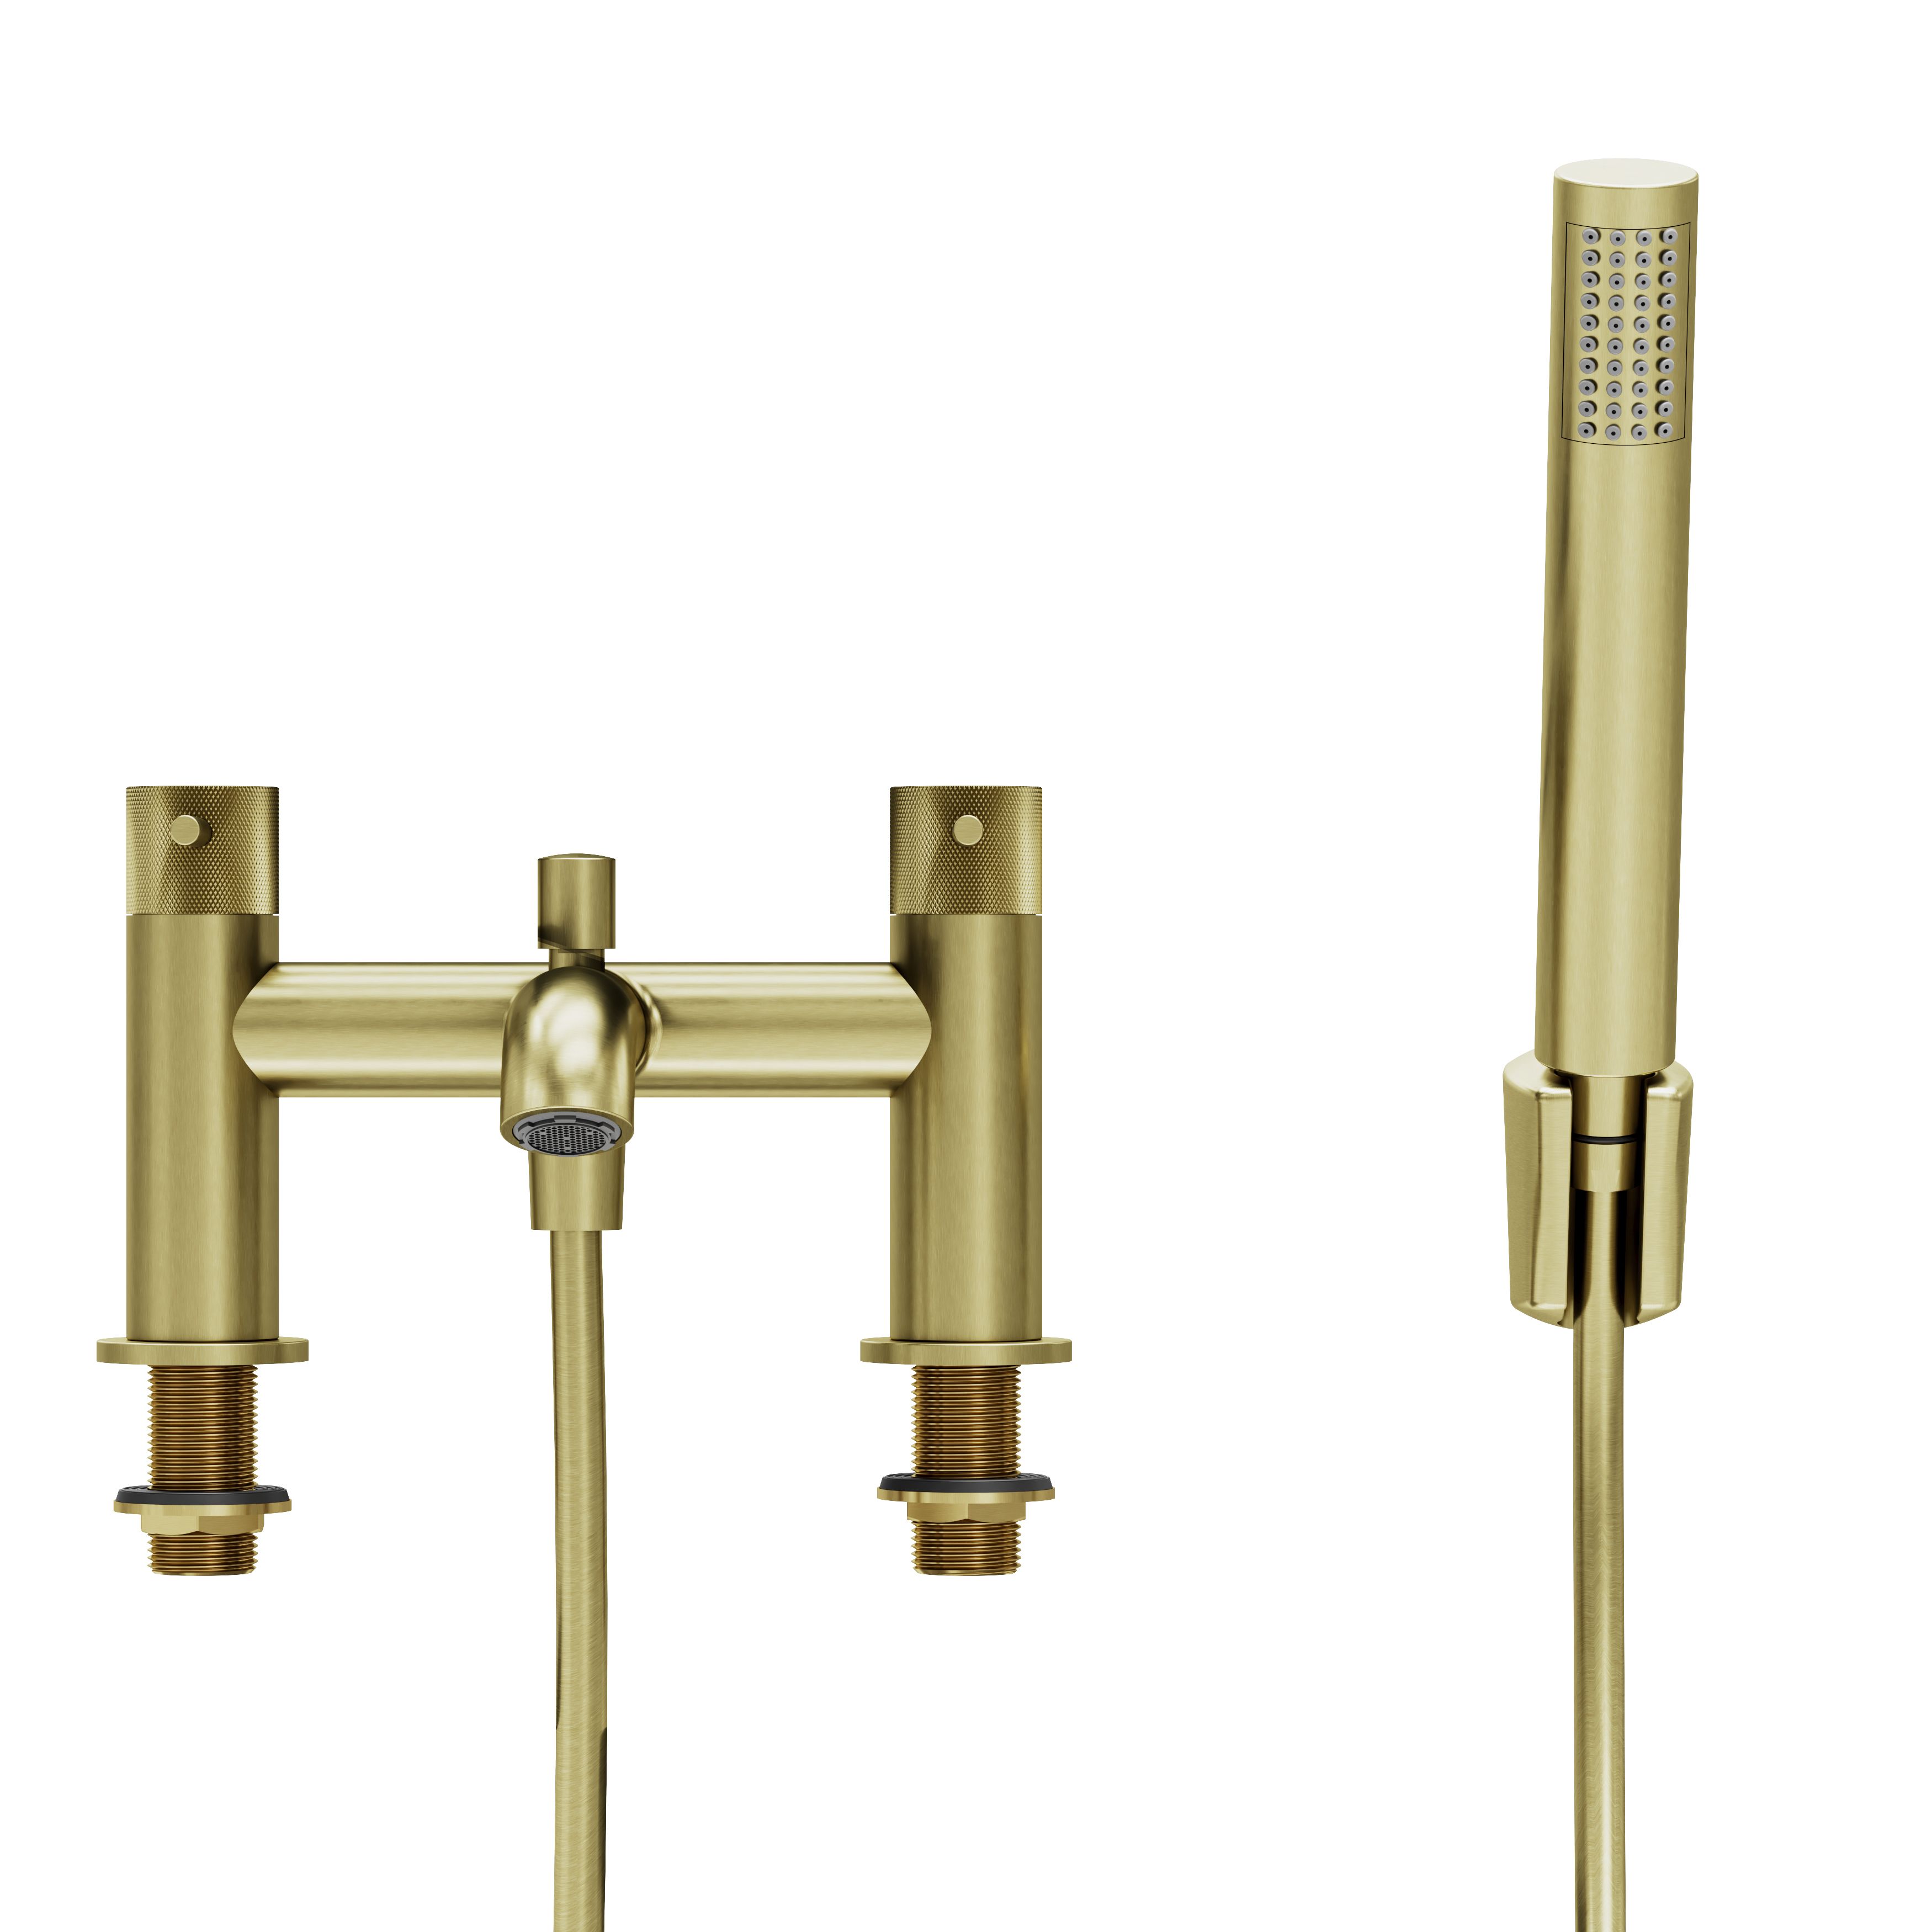 GoodHome Satin Brass effect Deck-mounted Double Bath shower mixer tap with shower kit